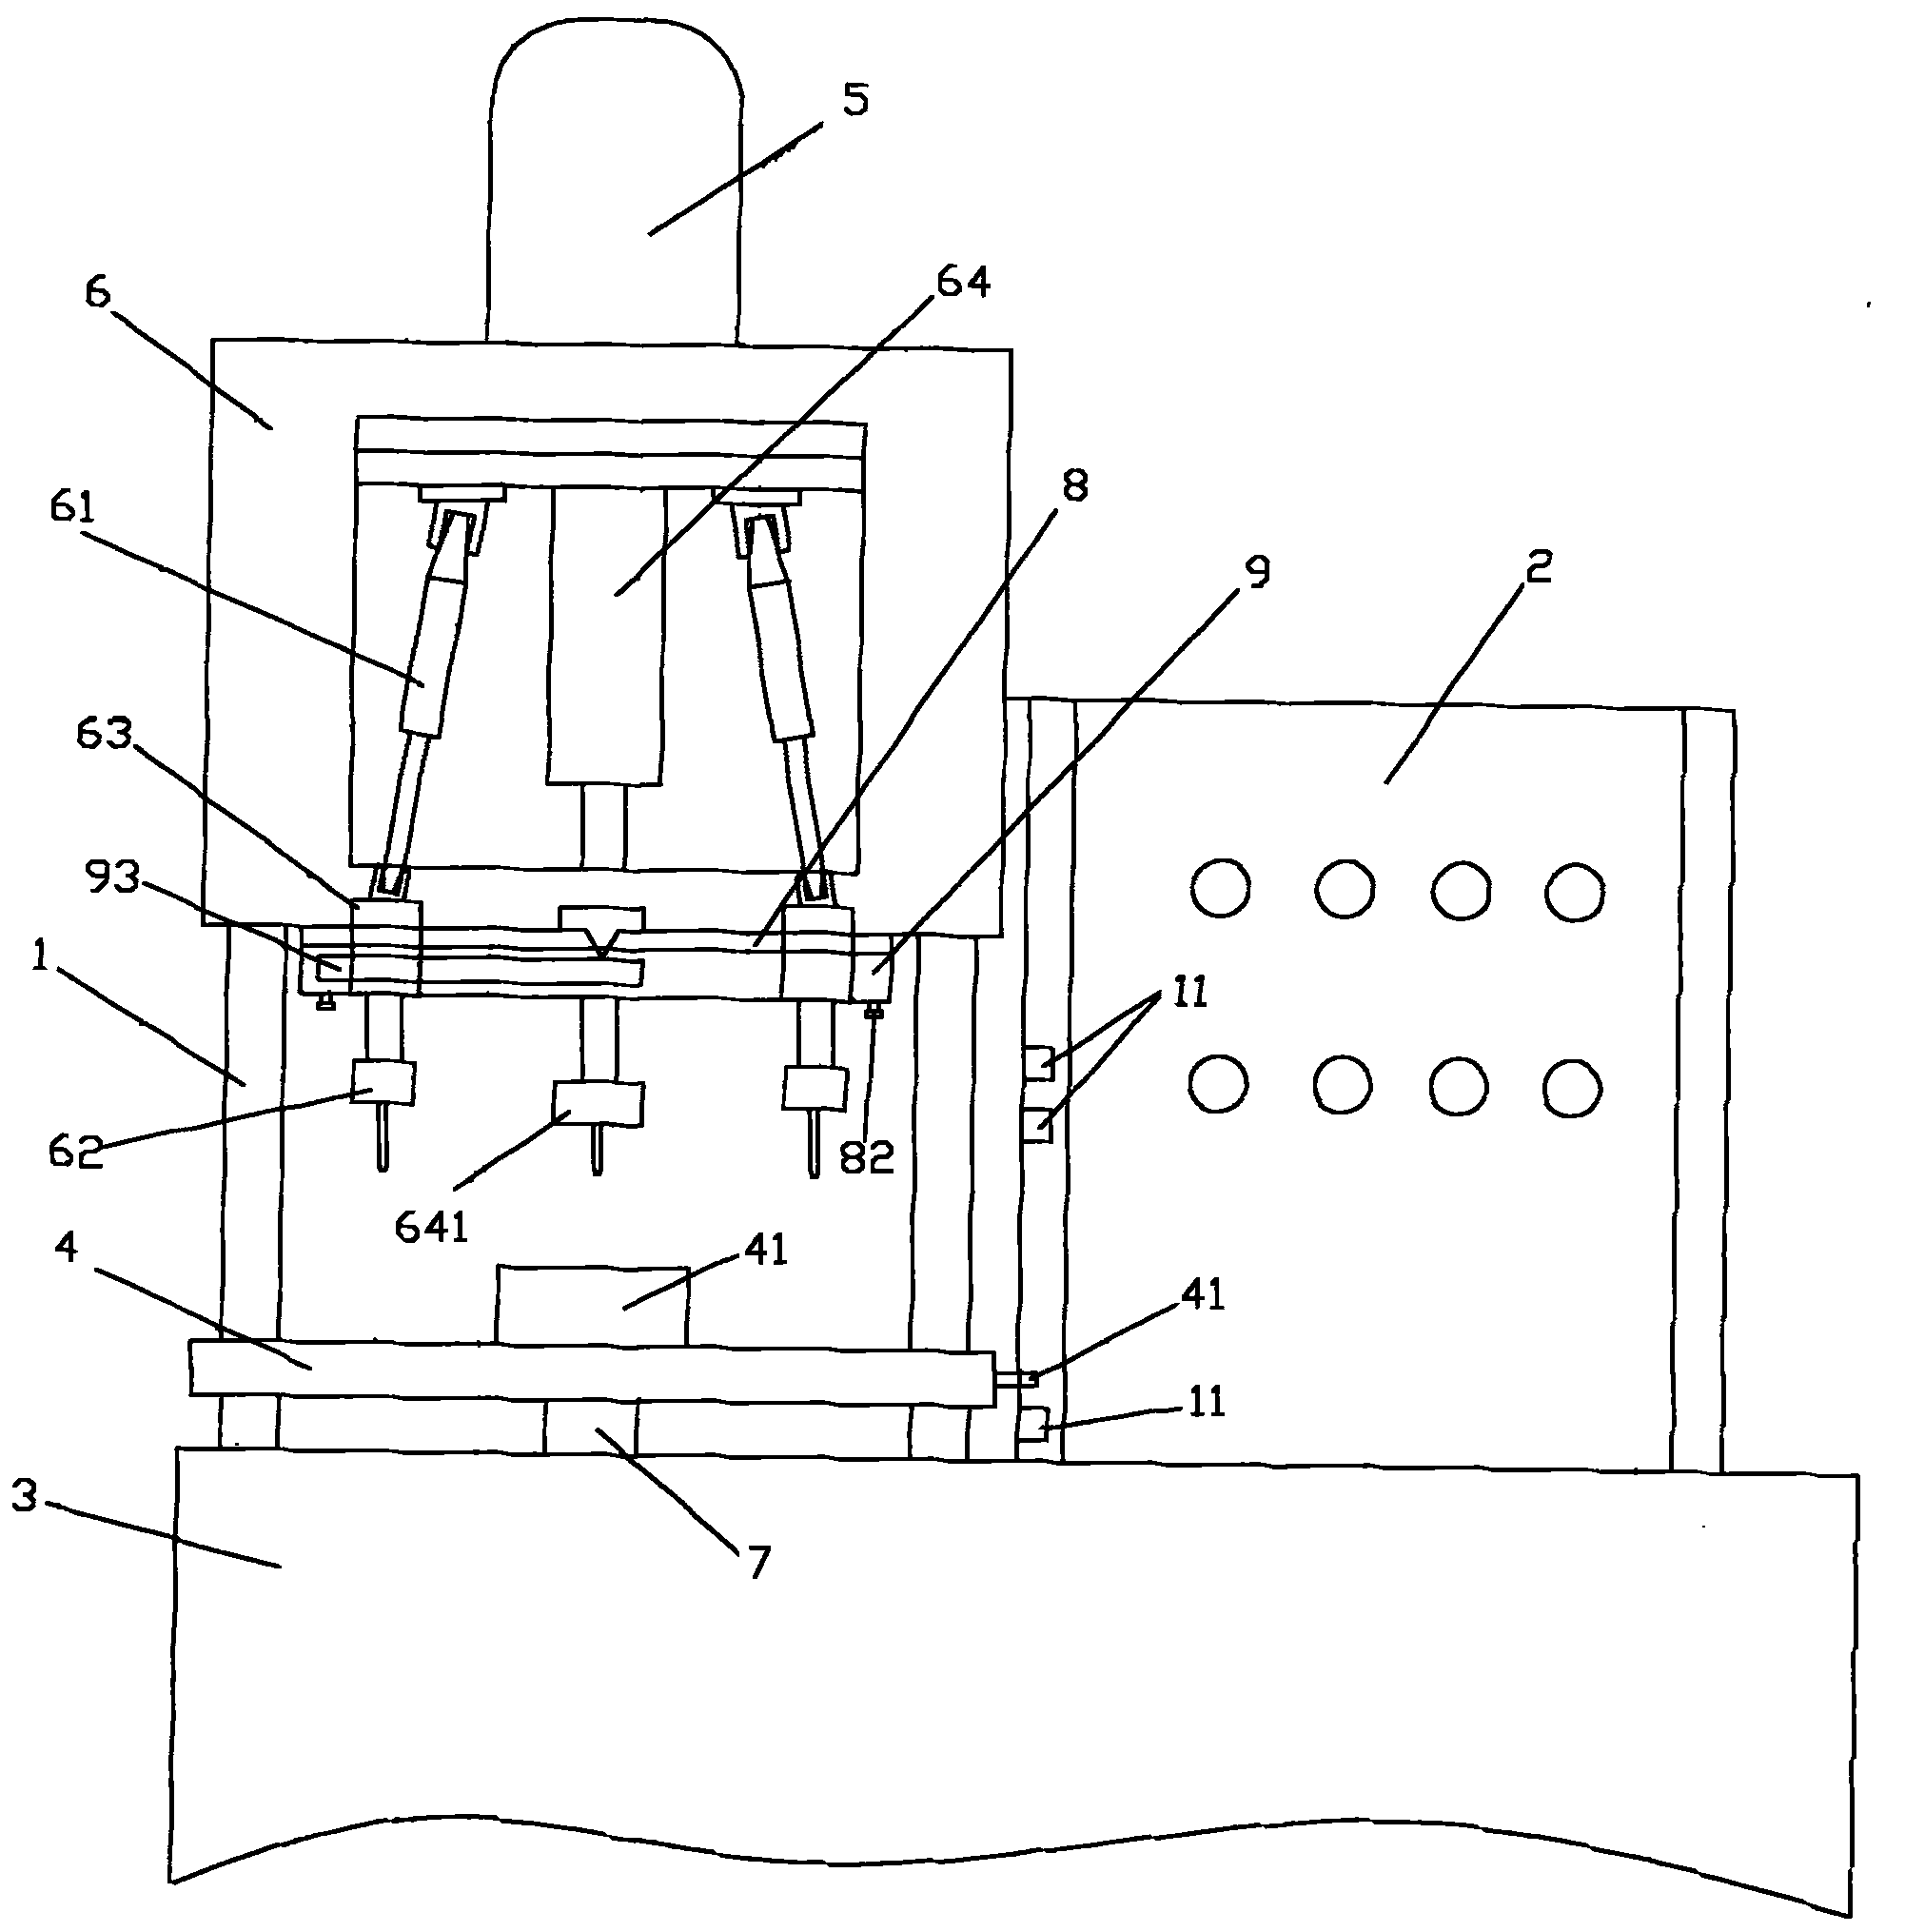 Multi-axis drilling machine with adjustable interval